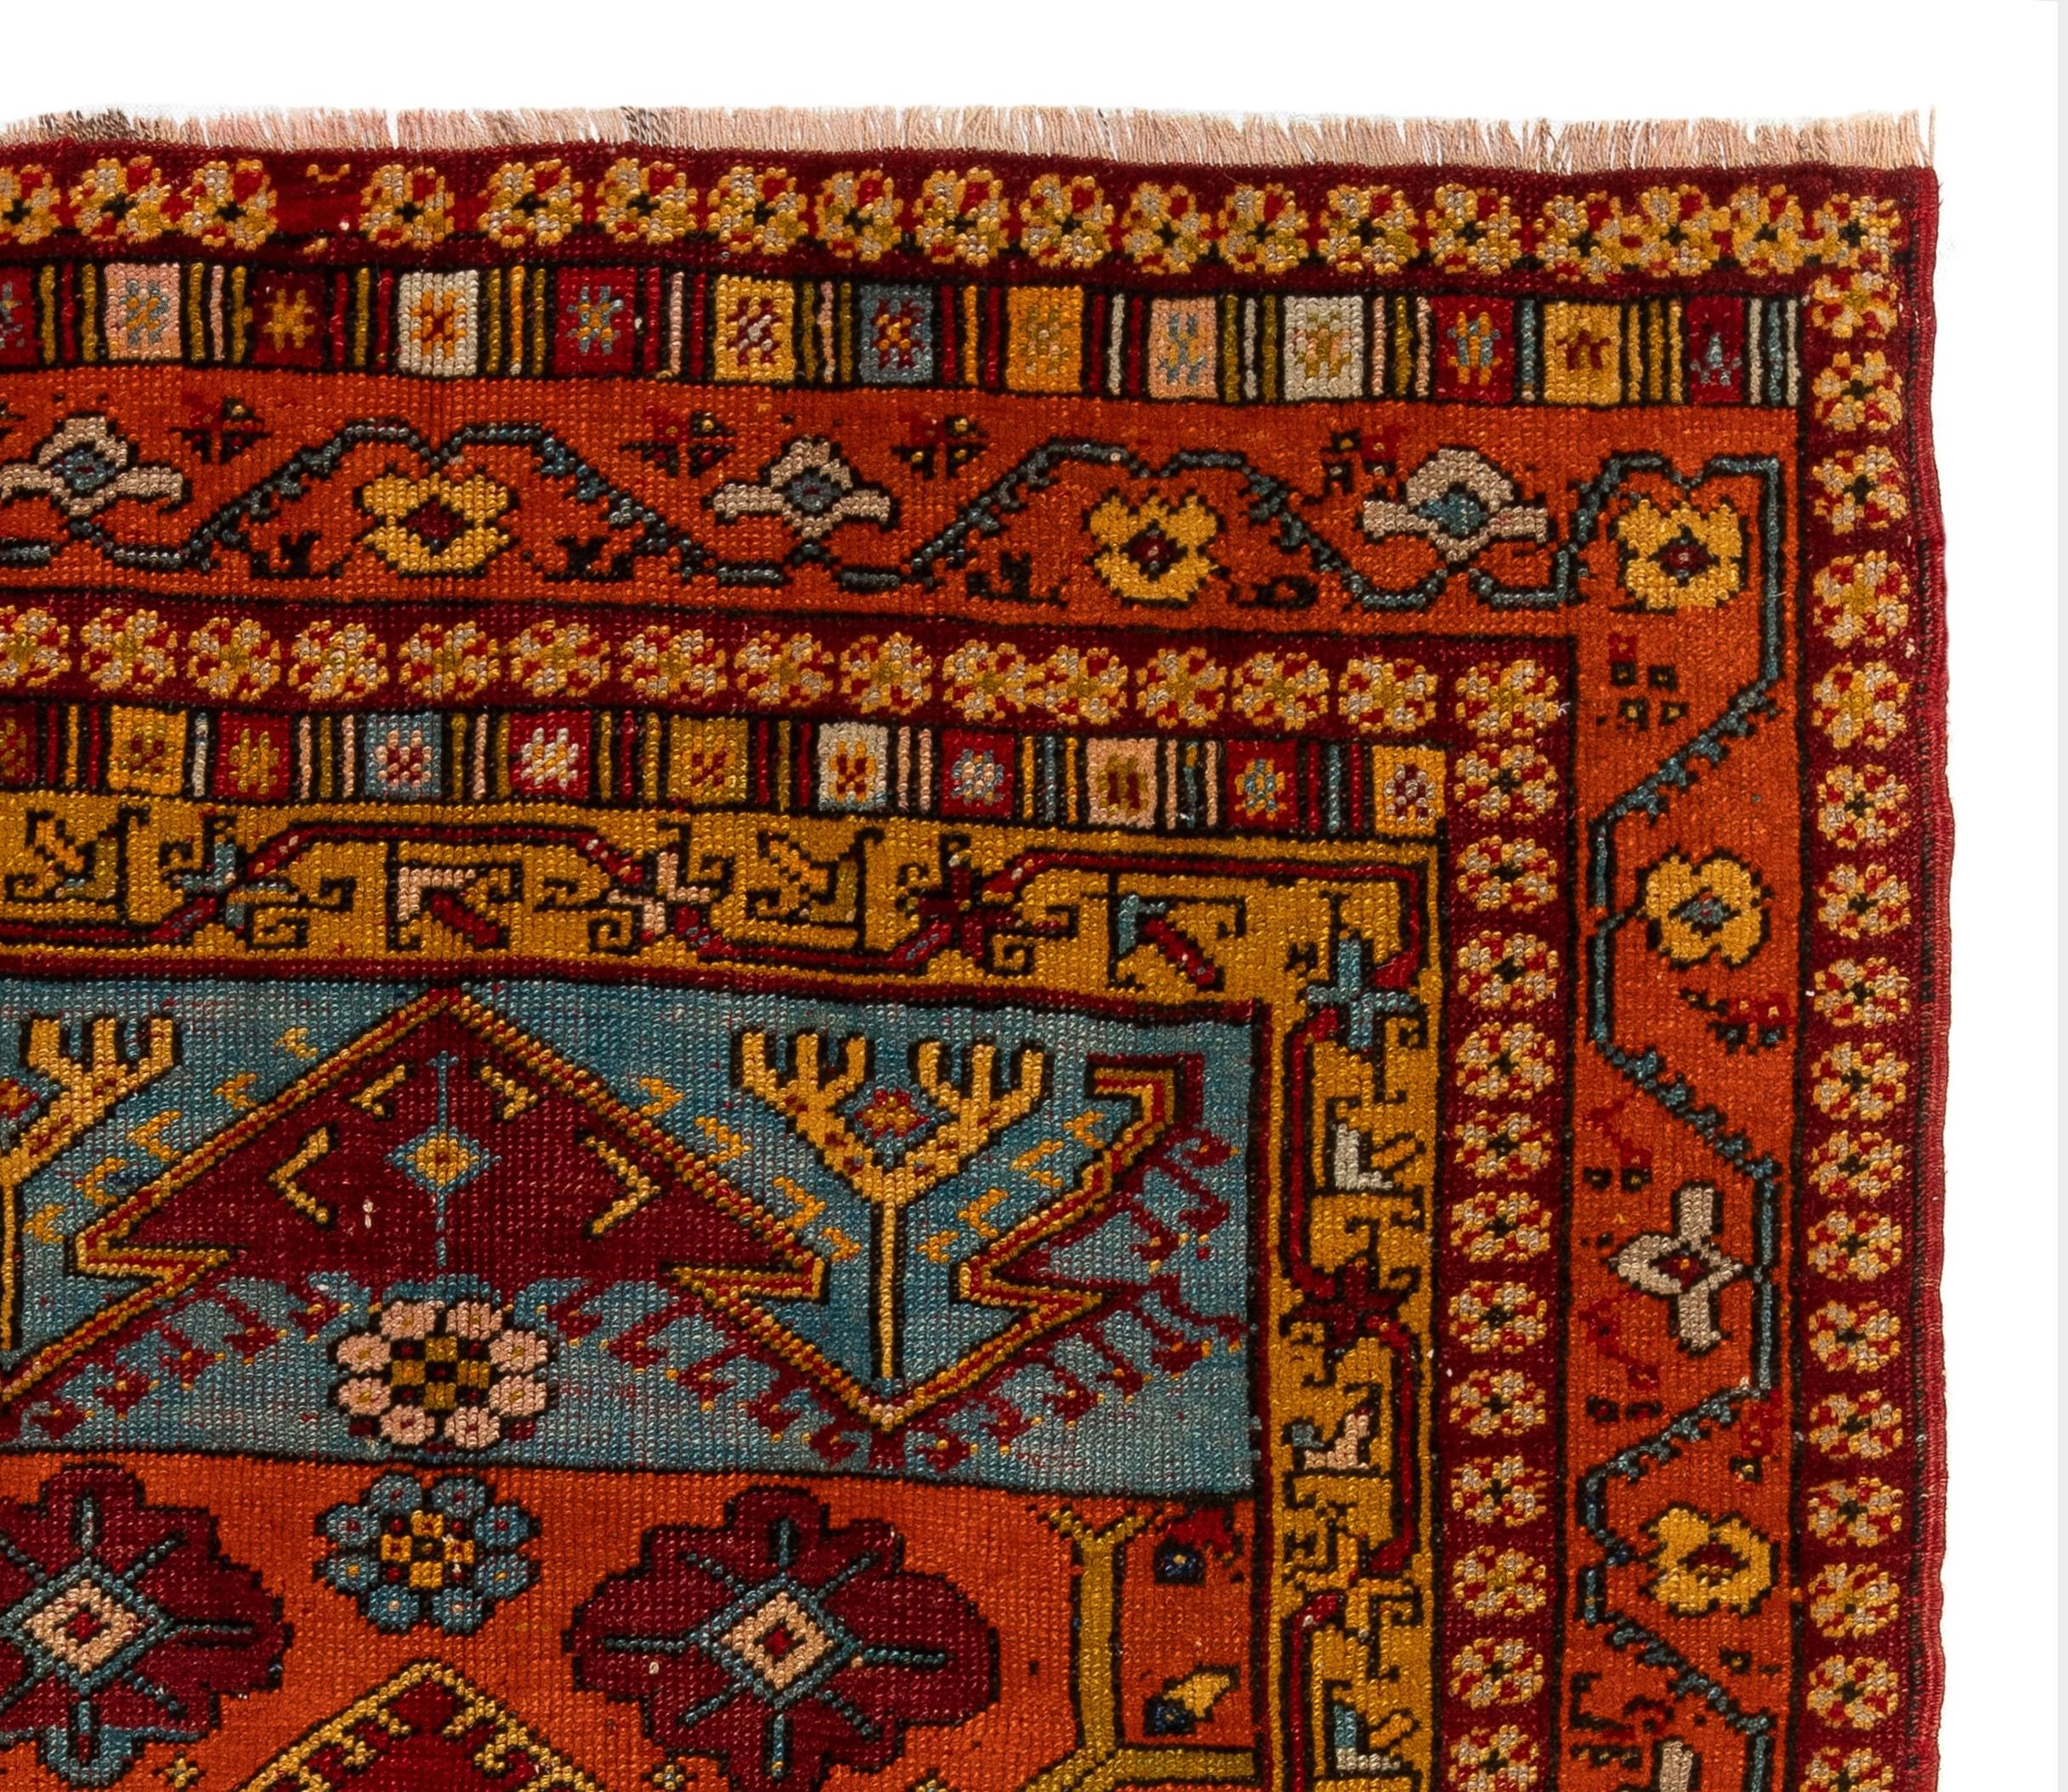 An antique Central Anatolian prayer rug with an unusual design, made of medium wool pile on a tightly woven wool foundation. The rug is sturdy and in good condition. 

It has been washed professionally and ready to be used in a residential or